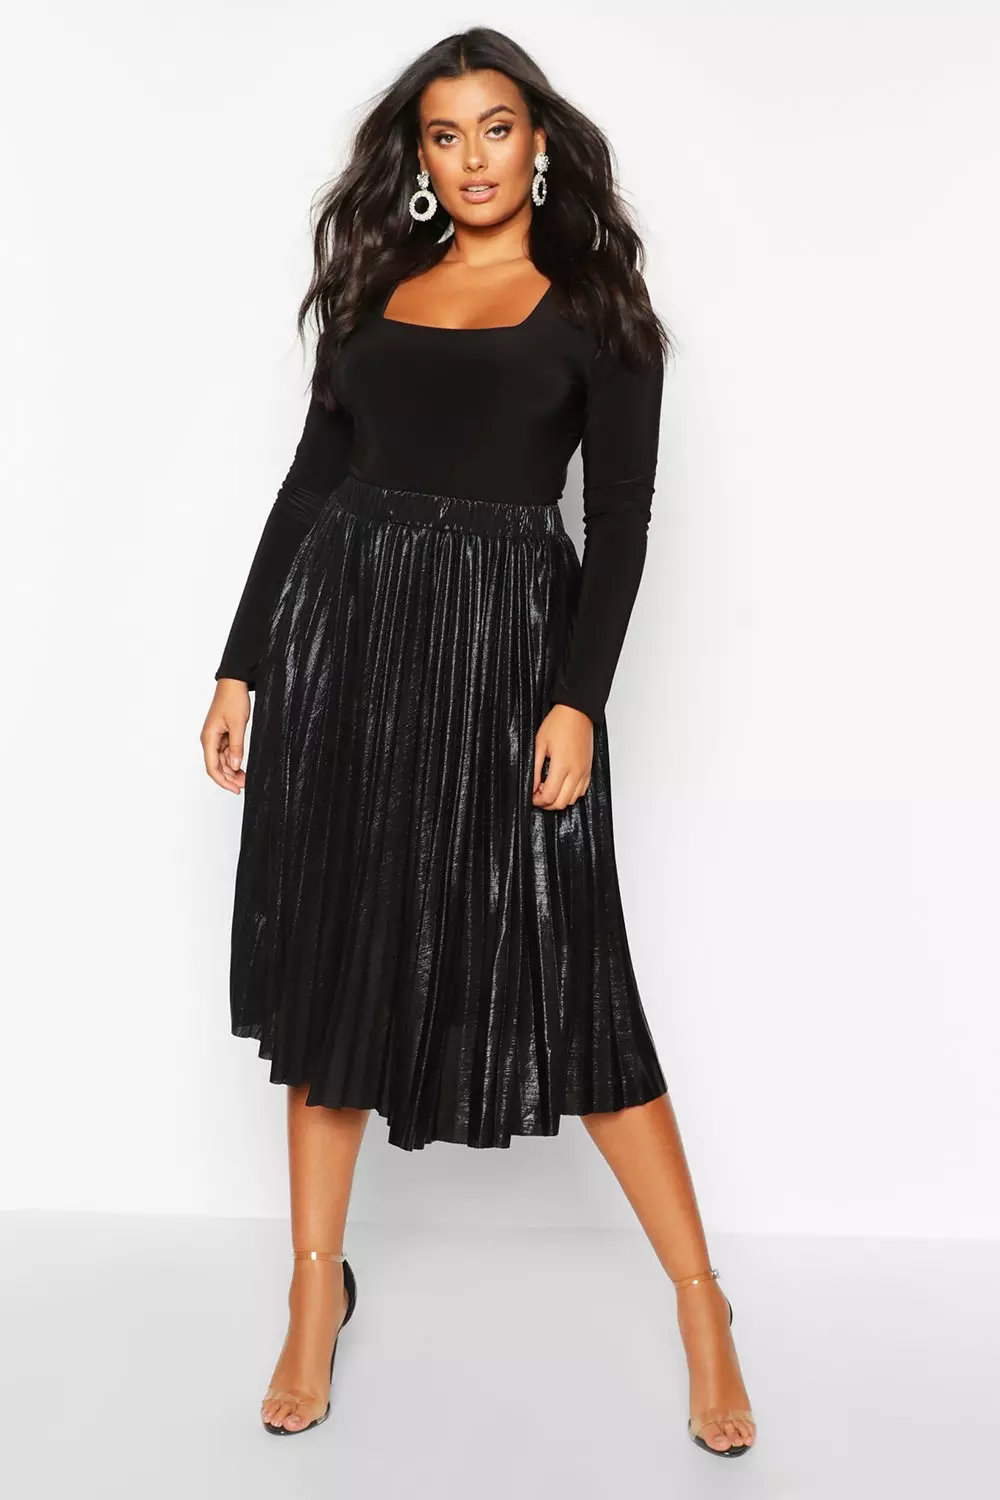 Metallic Pleated Midi Skirt Outfit | vlr.eng.br